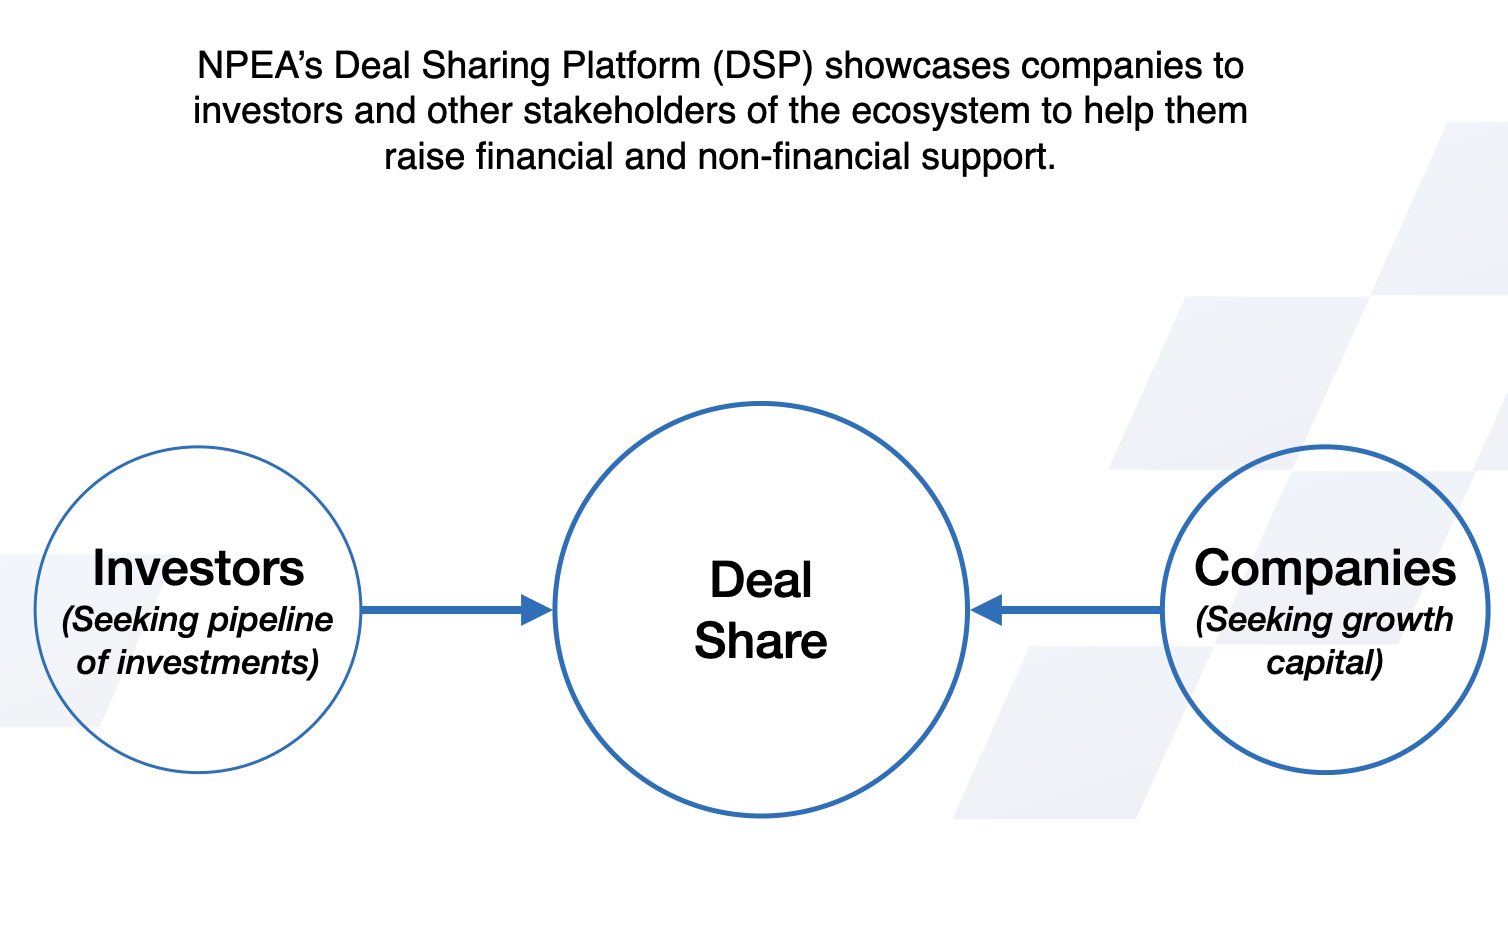 Launch of the Deal Sharing Platform